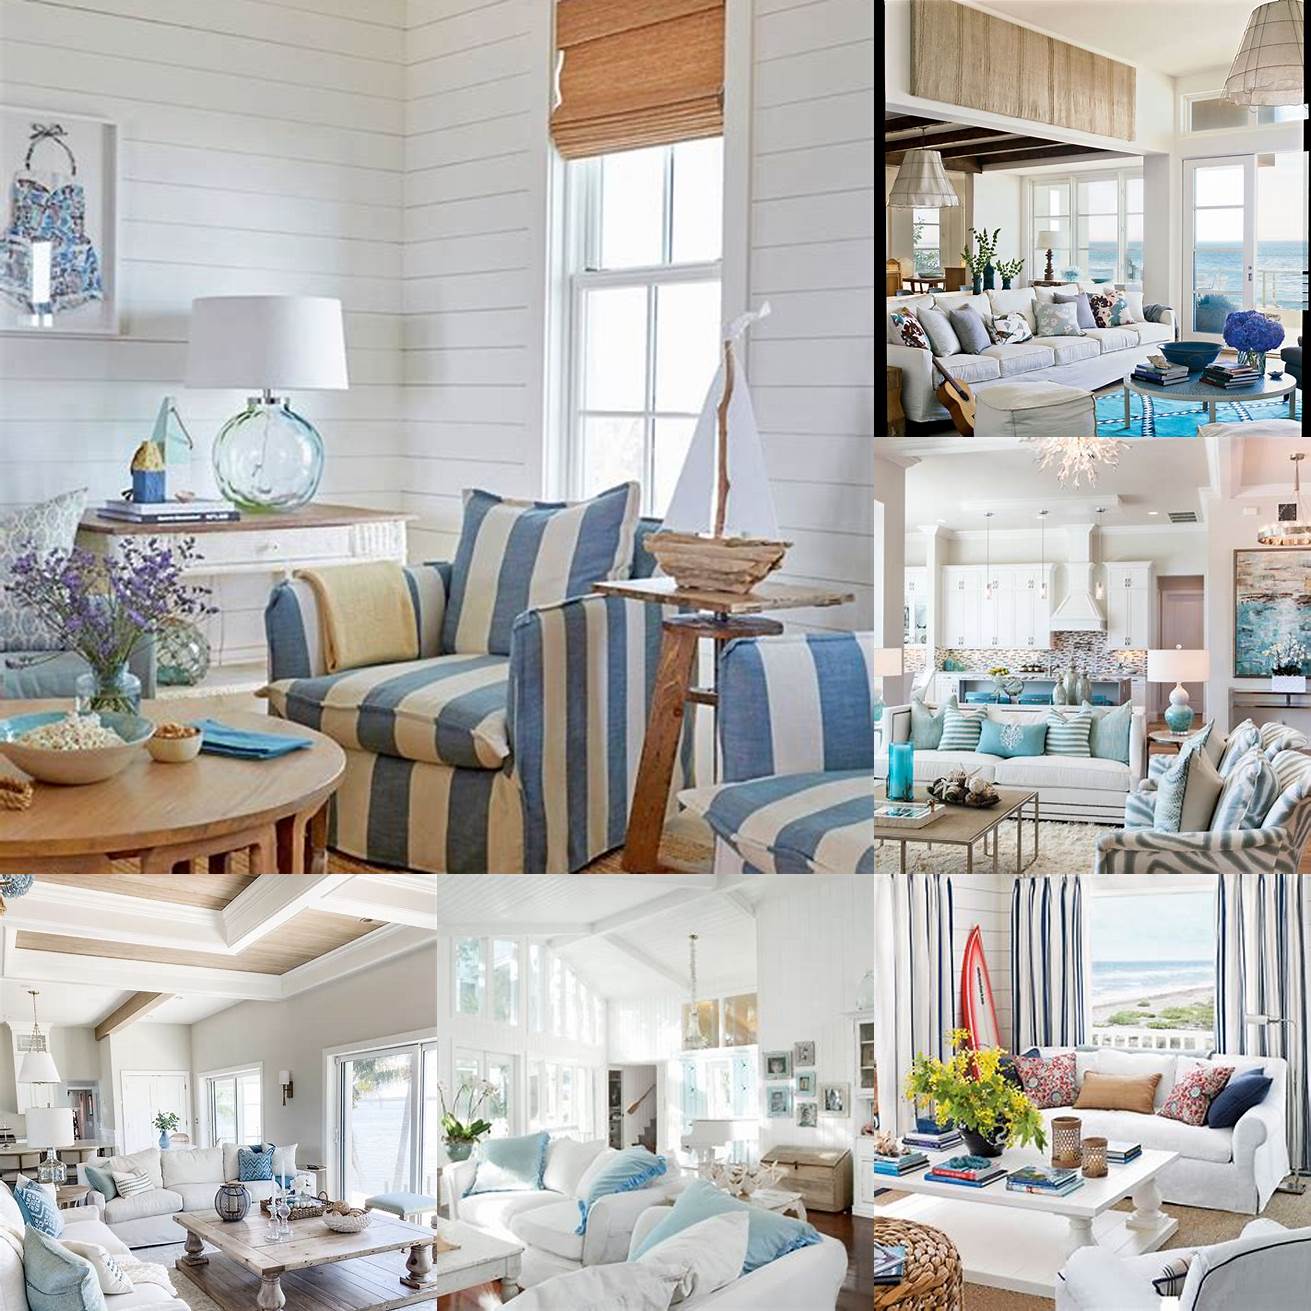 Shabby Chic can also be mixed with coastal style for a more relaxed and beachy feel